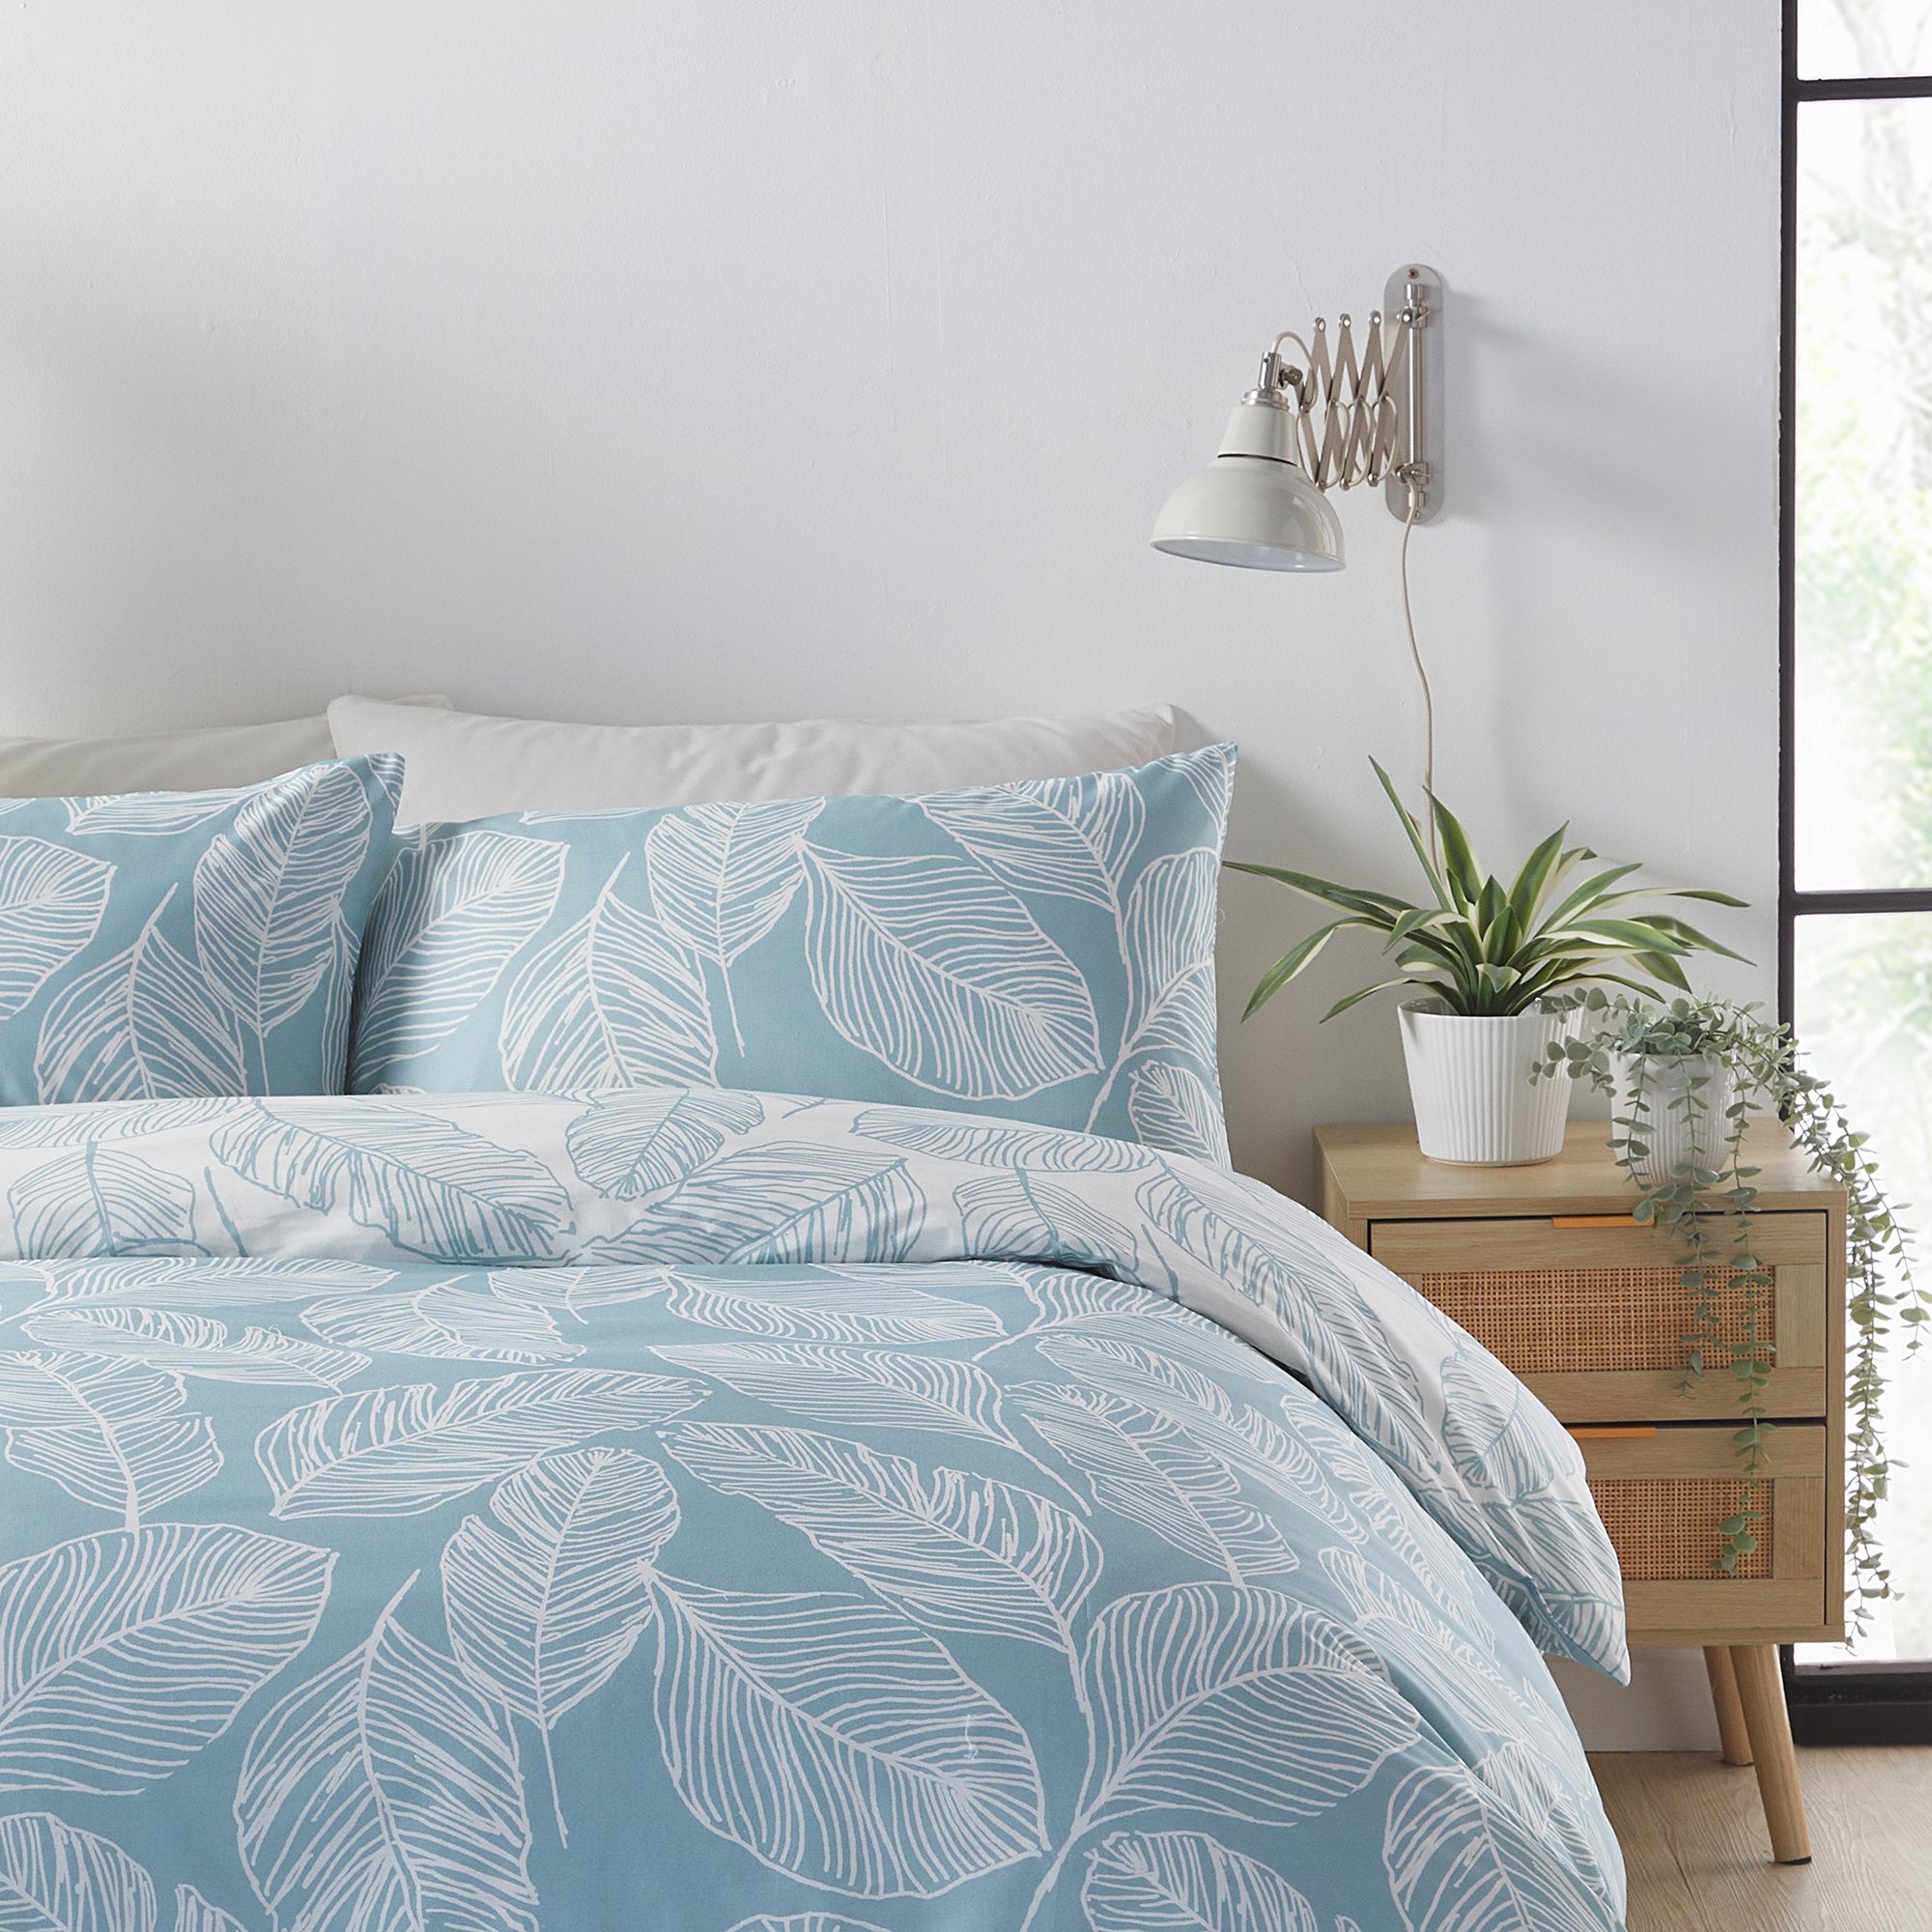 Duvet Cover Set Matteo by Fusion in Duck Egg